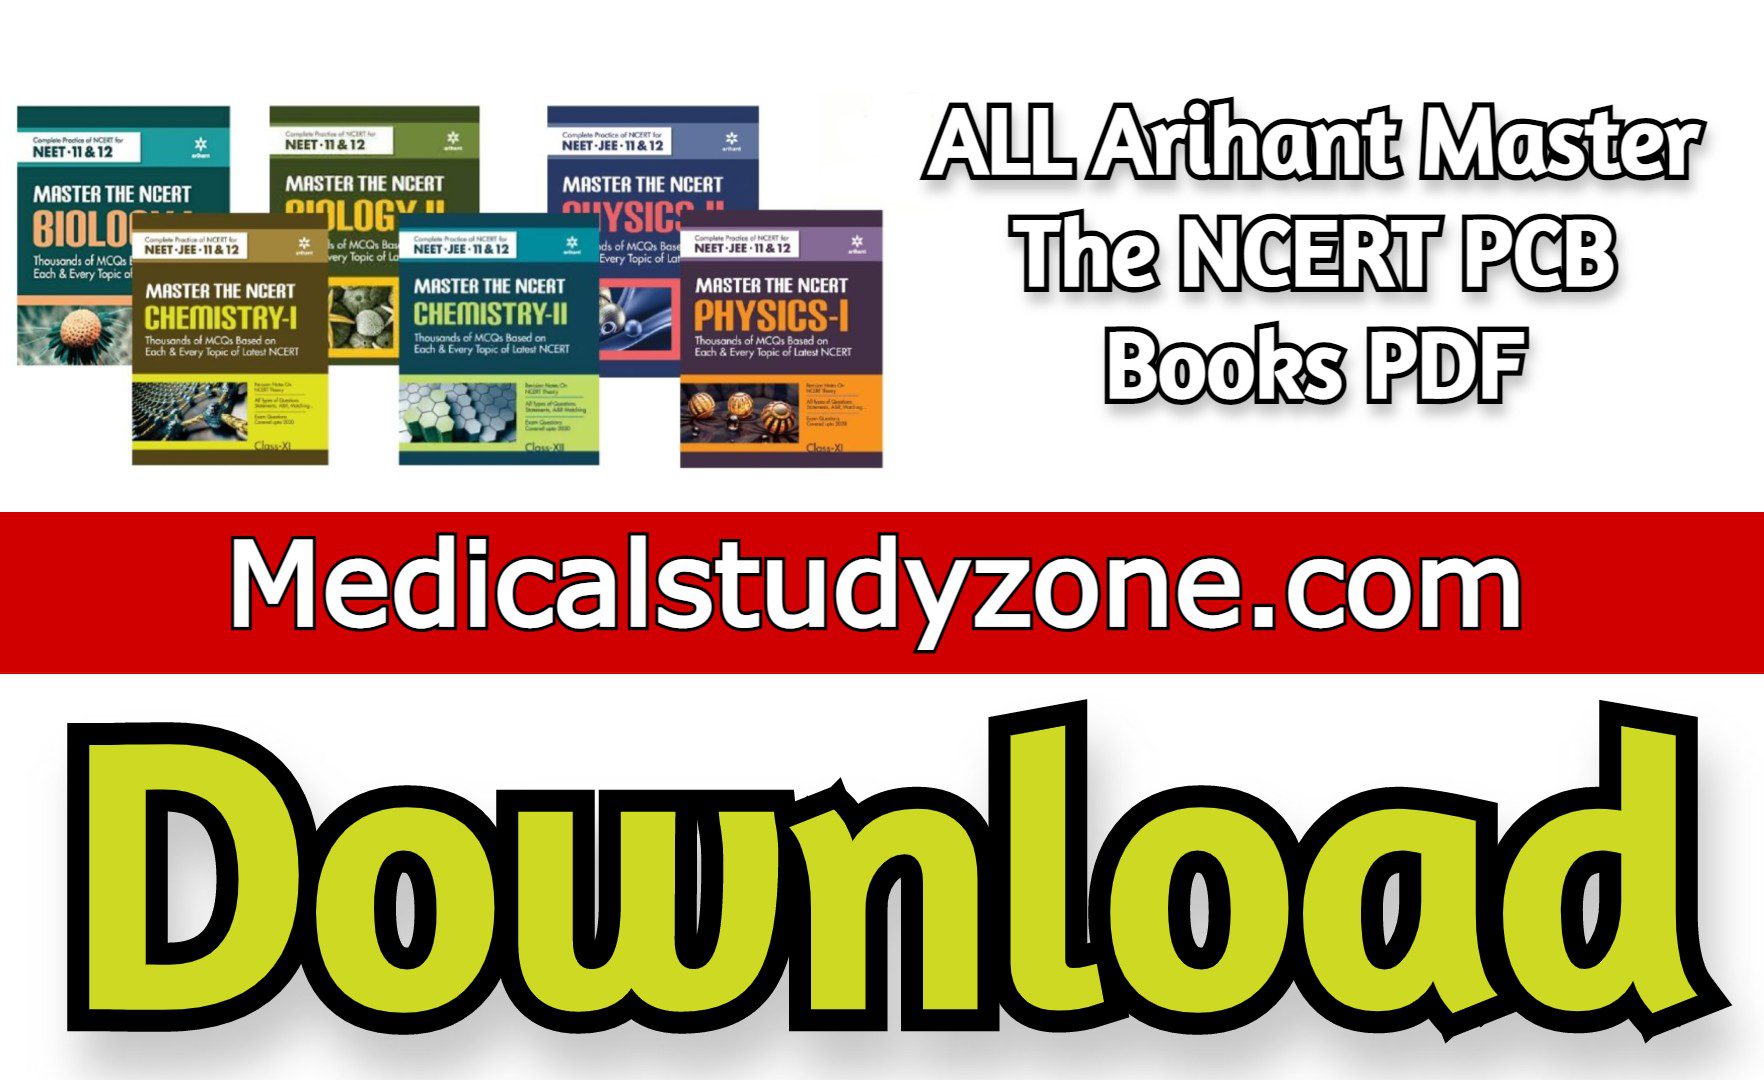 ALL Arihant Master The NCERT PCB Books PDF Free Download